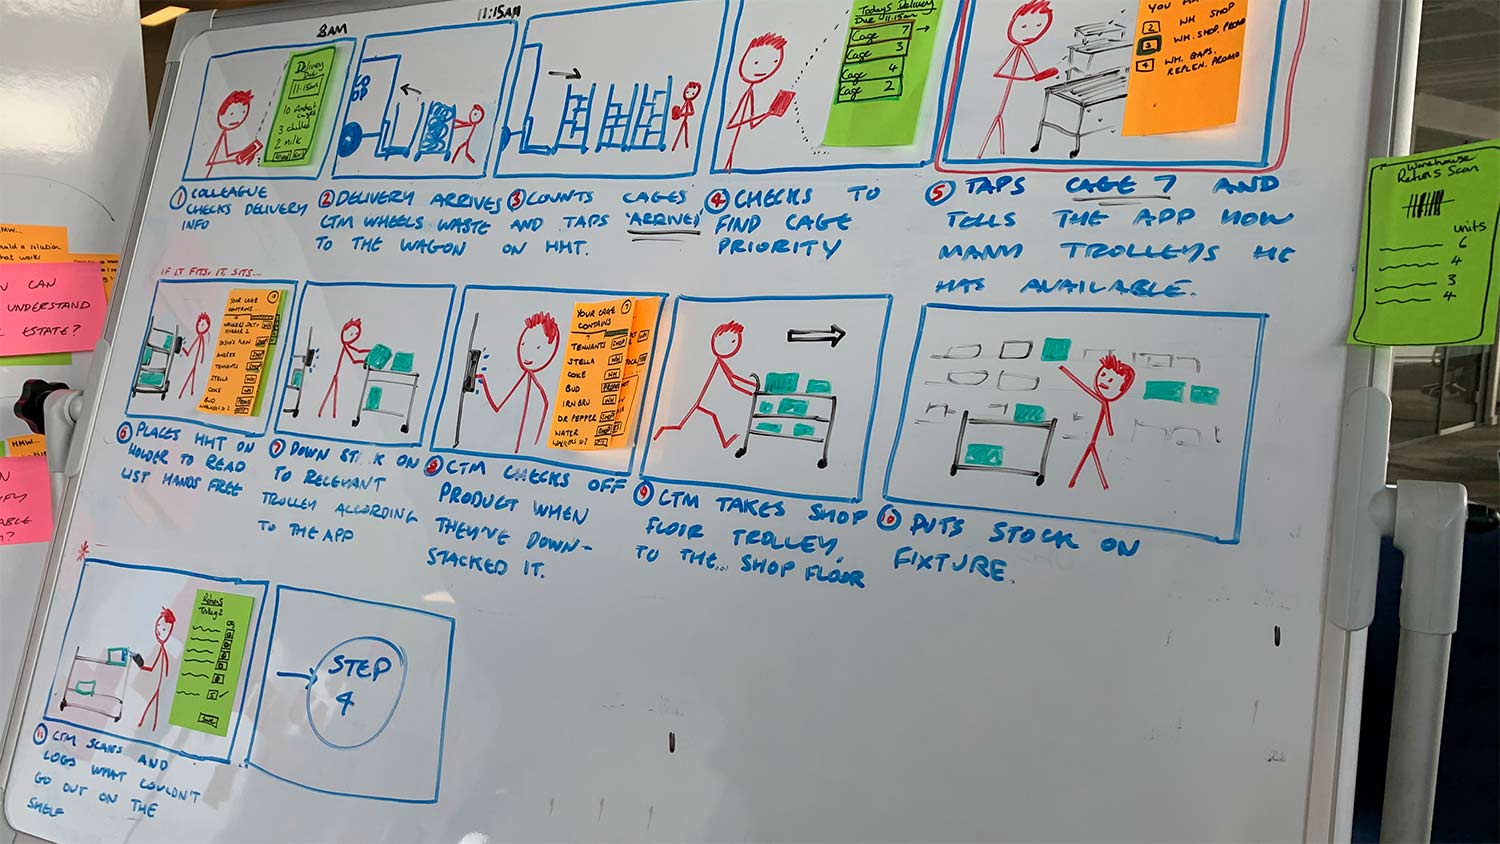 A storyboard helps you consider how your idea works in context.